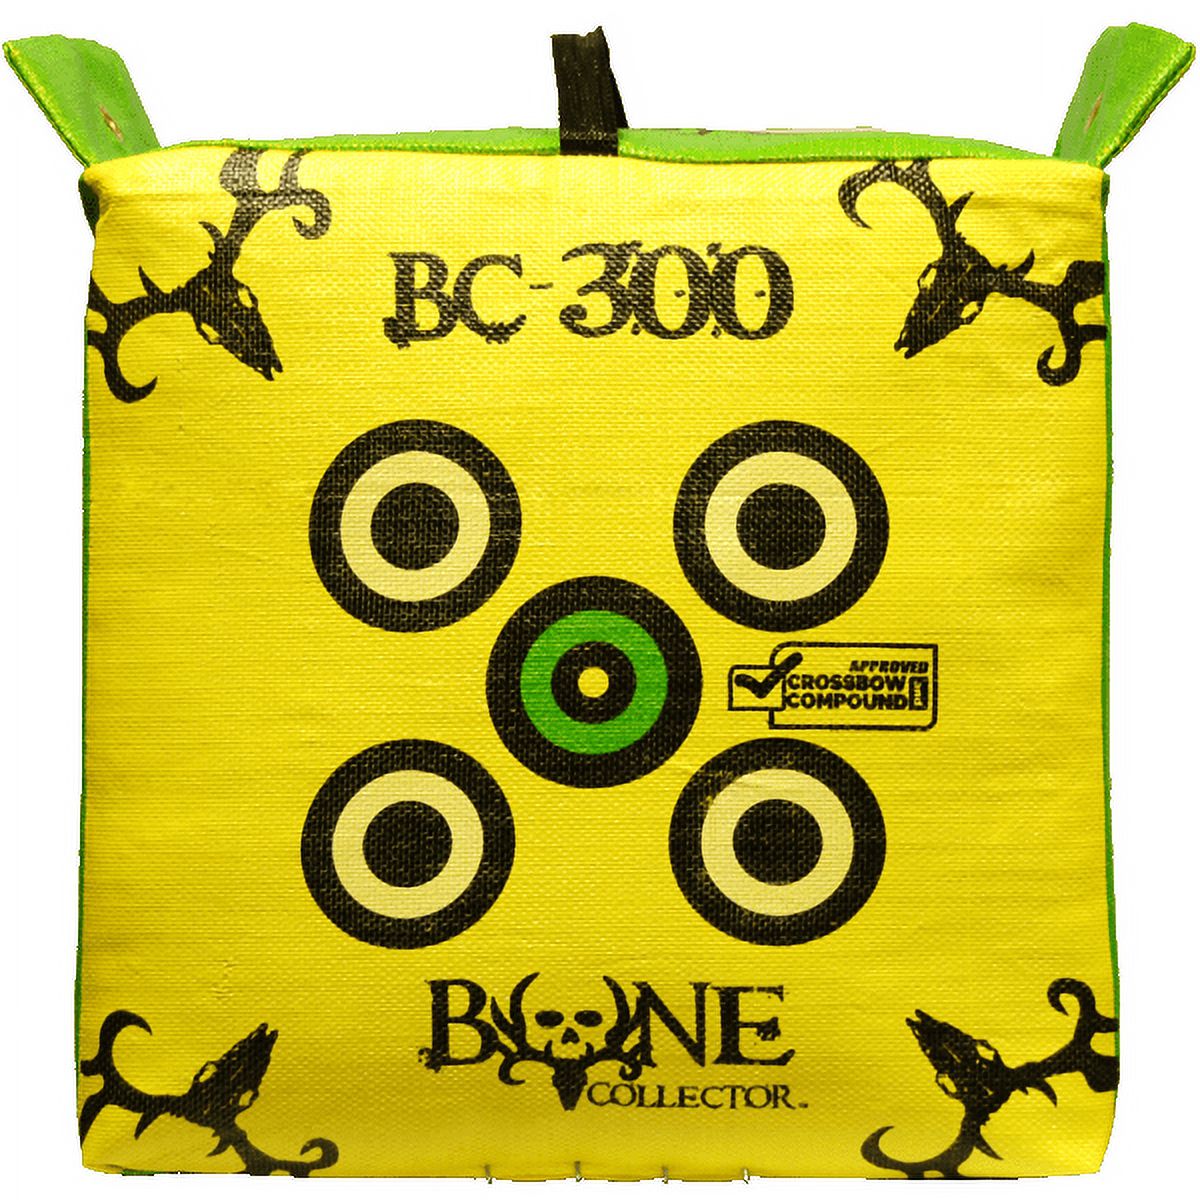 Bone Collector BC-300 Bag Field Point Archery Target - image 3 of 7